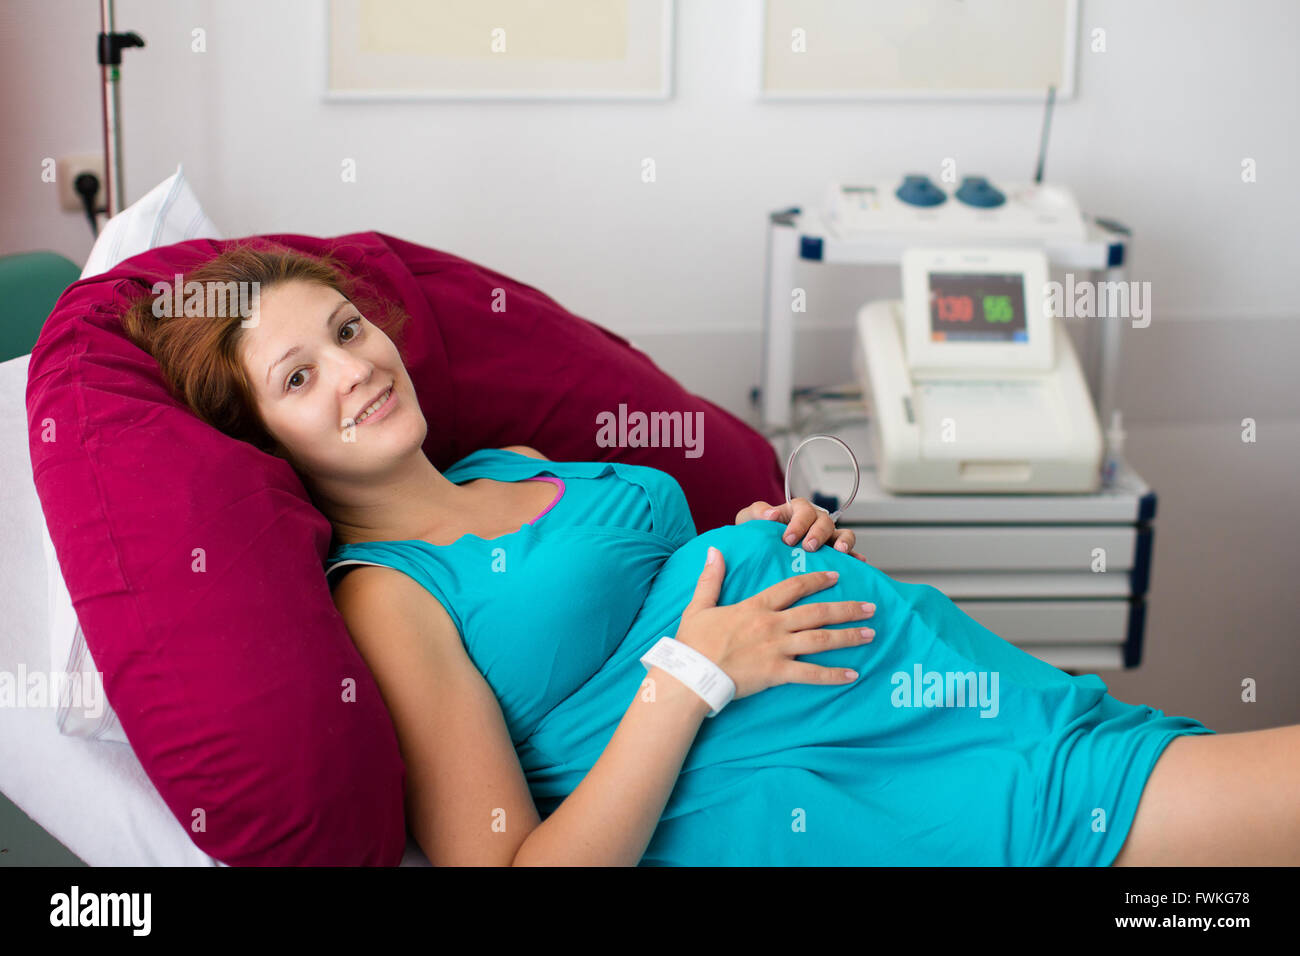 Mother giving birth to baby. Pregnant patient in a hospital at doctor